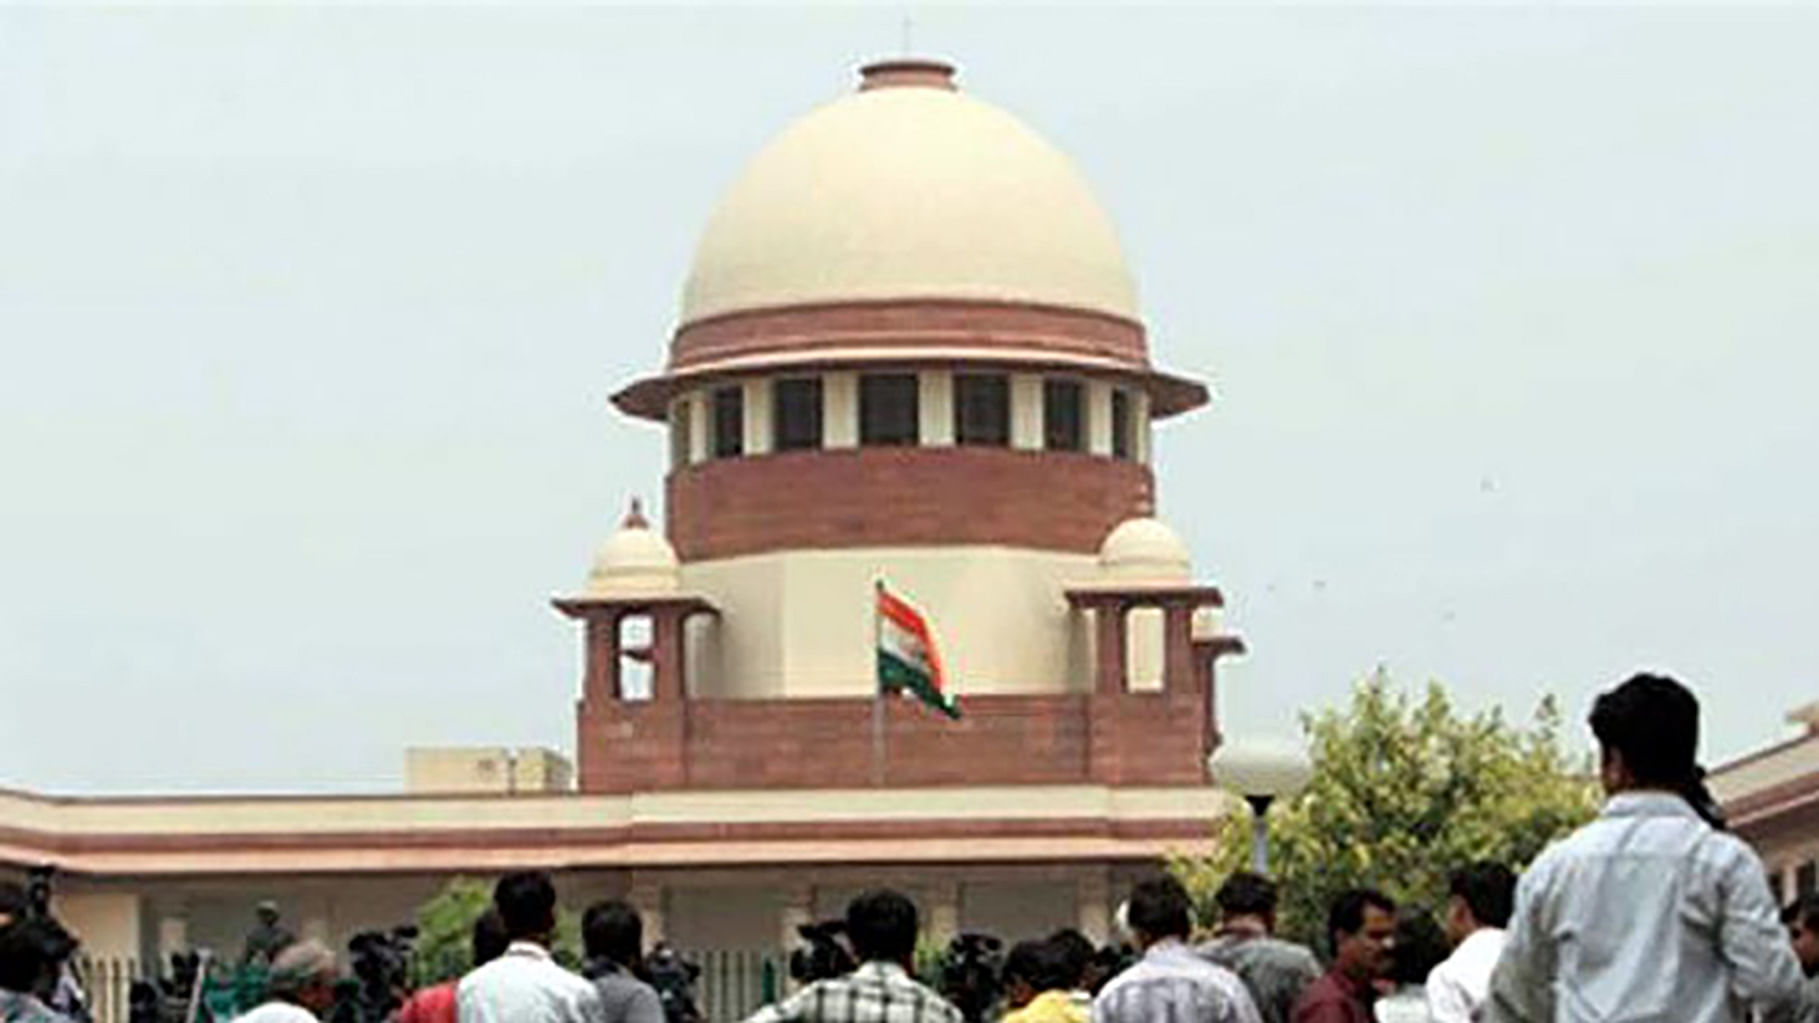 BCCI’s hearing in the Supreme Court has been adjourned to 2 May.